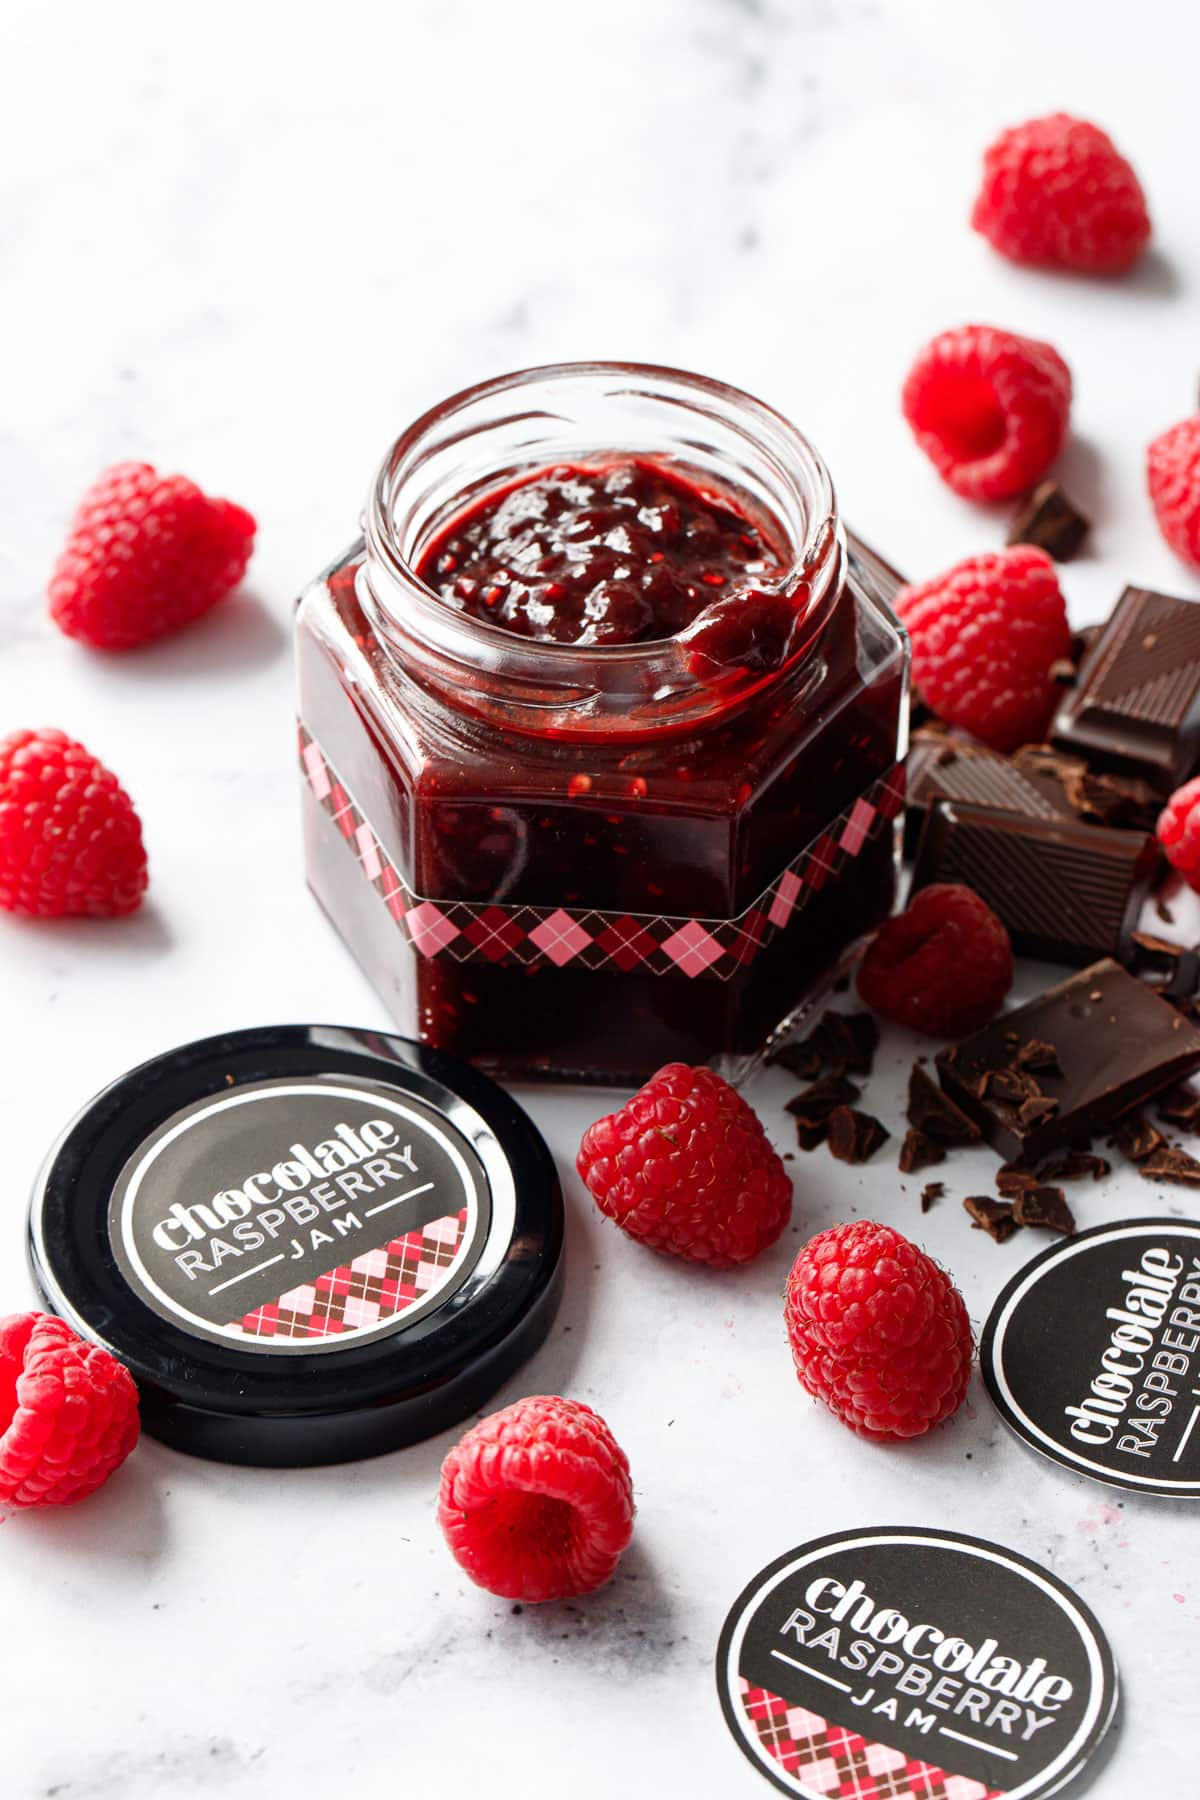 Small faceted glass canning jar filled with Chocolate Raspberry Jam, with brown and pink argyle designed labels and chopped chocolate and fresh raspberries scattered around.